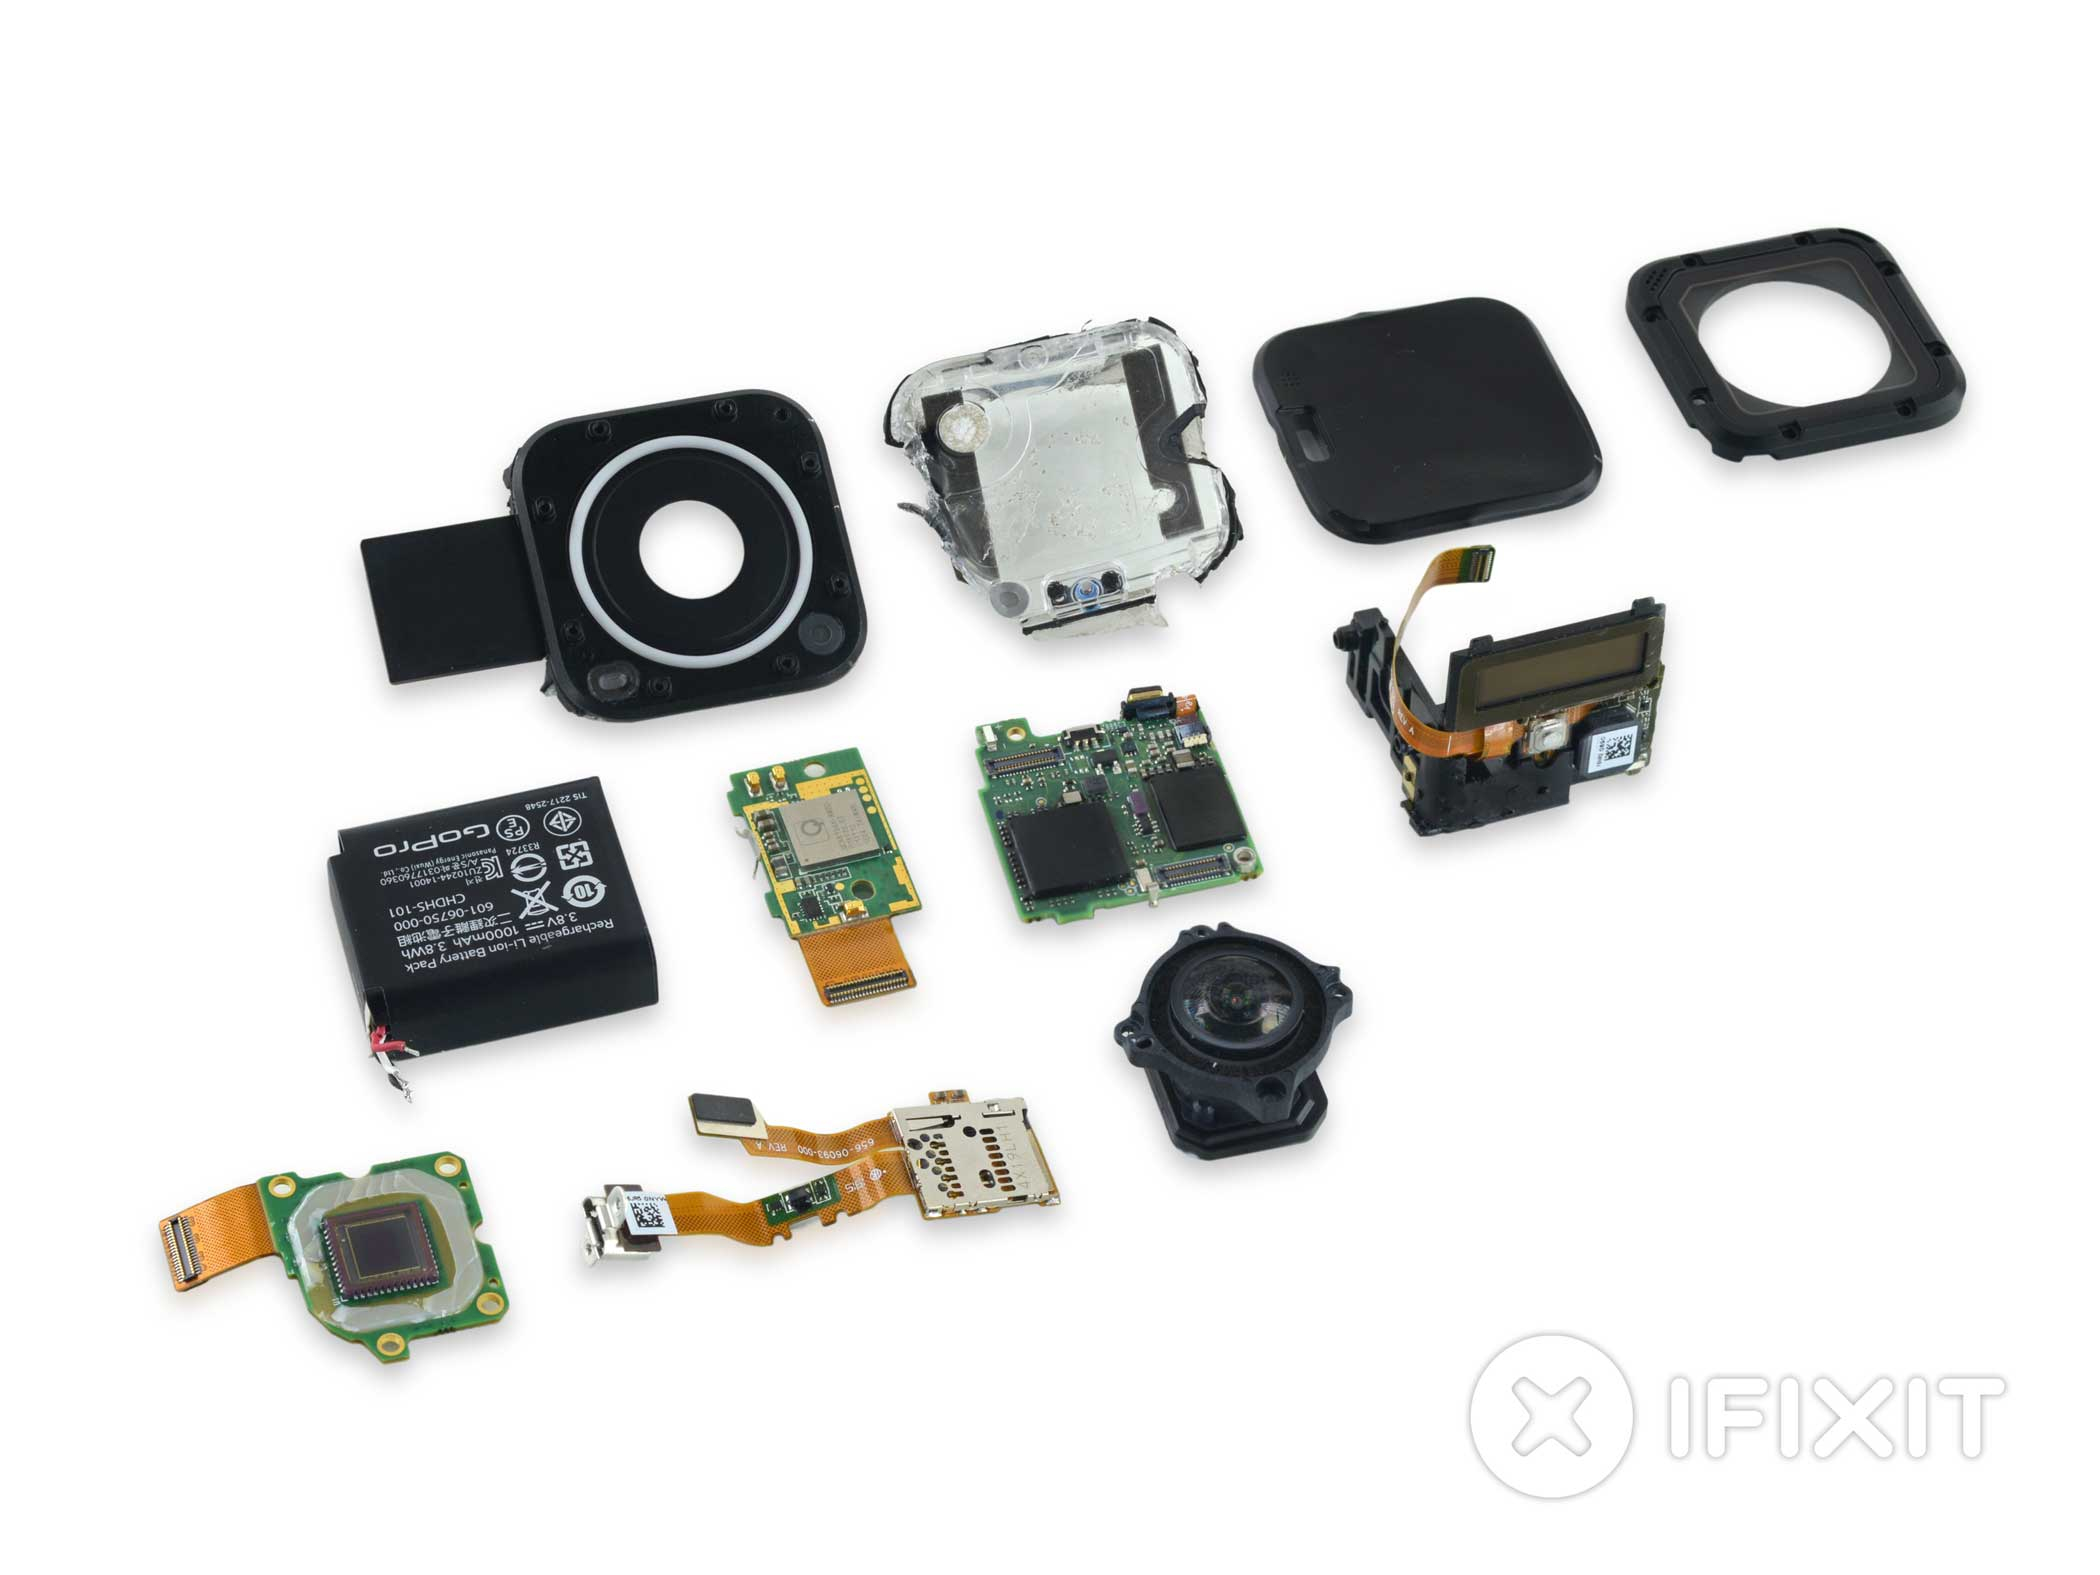 The GoPro HERO4 Session entirely dismantled.